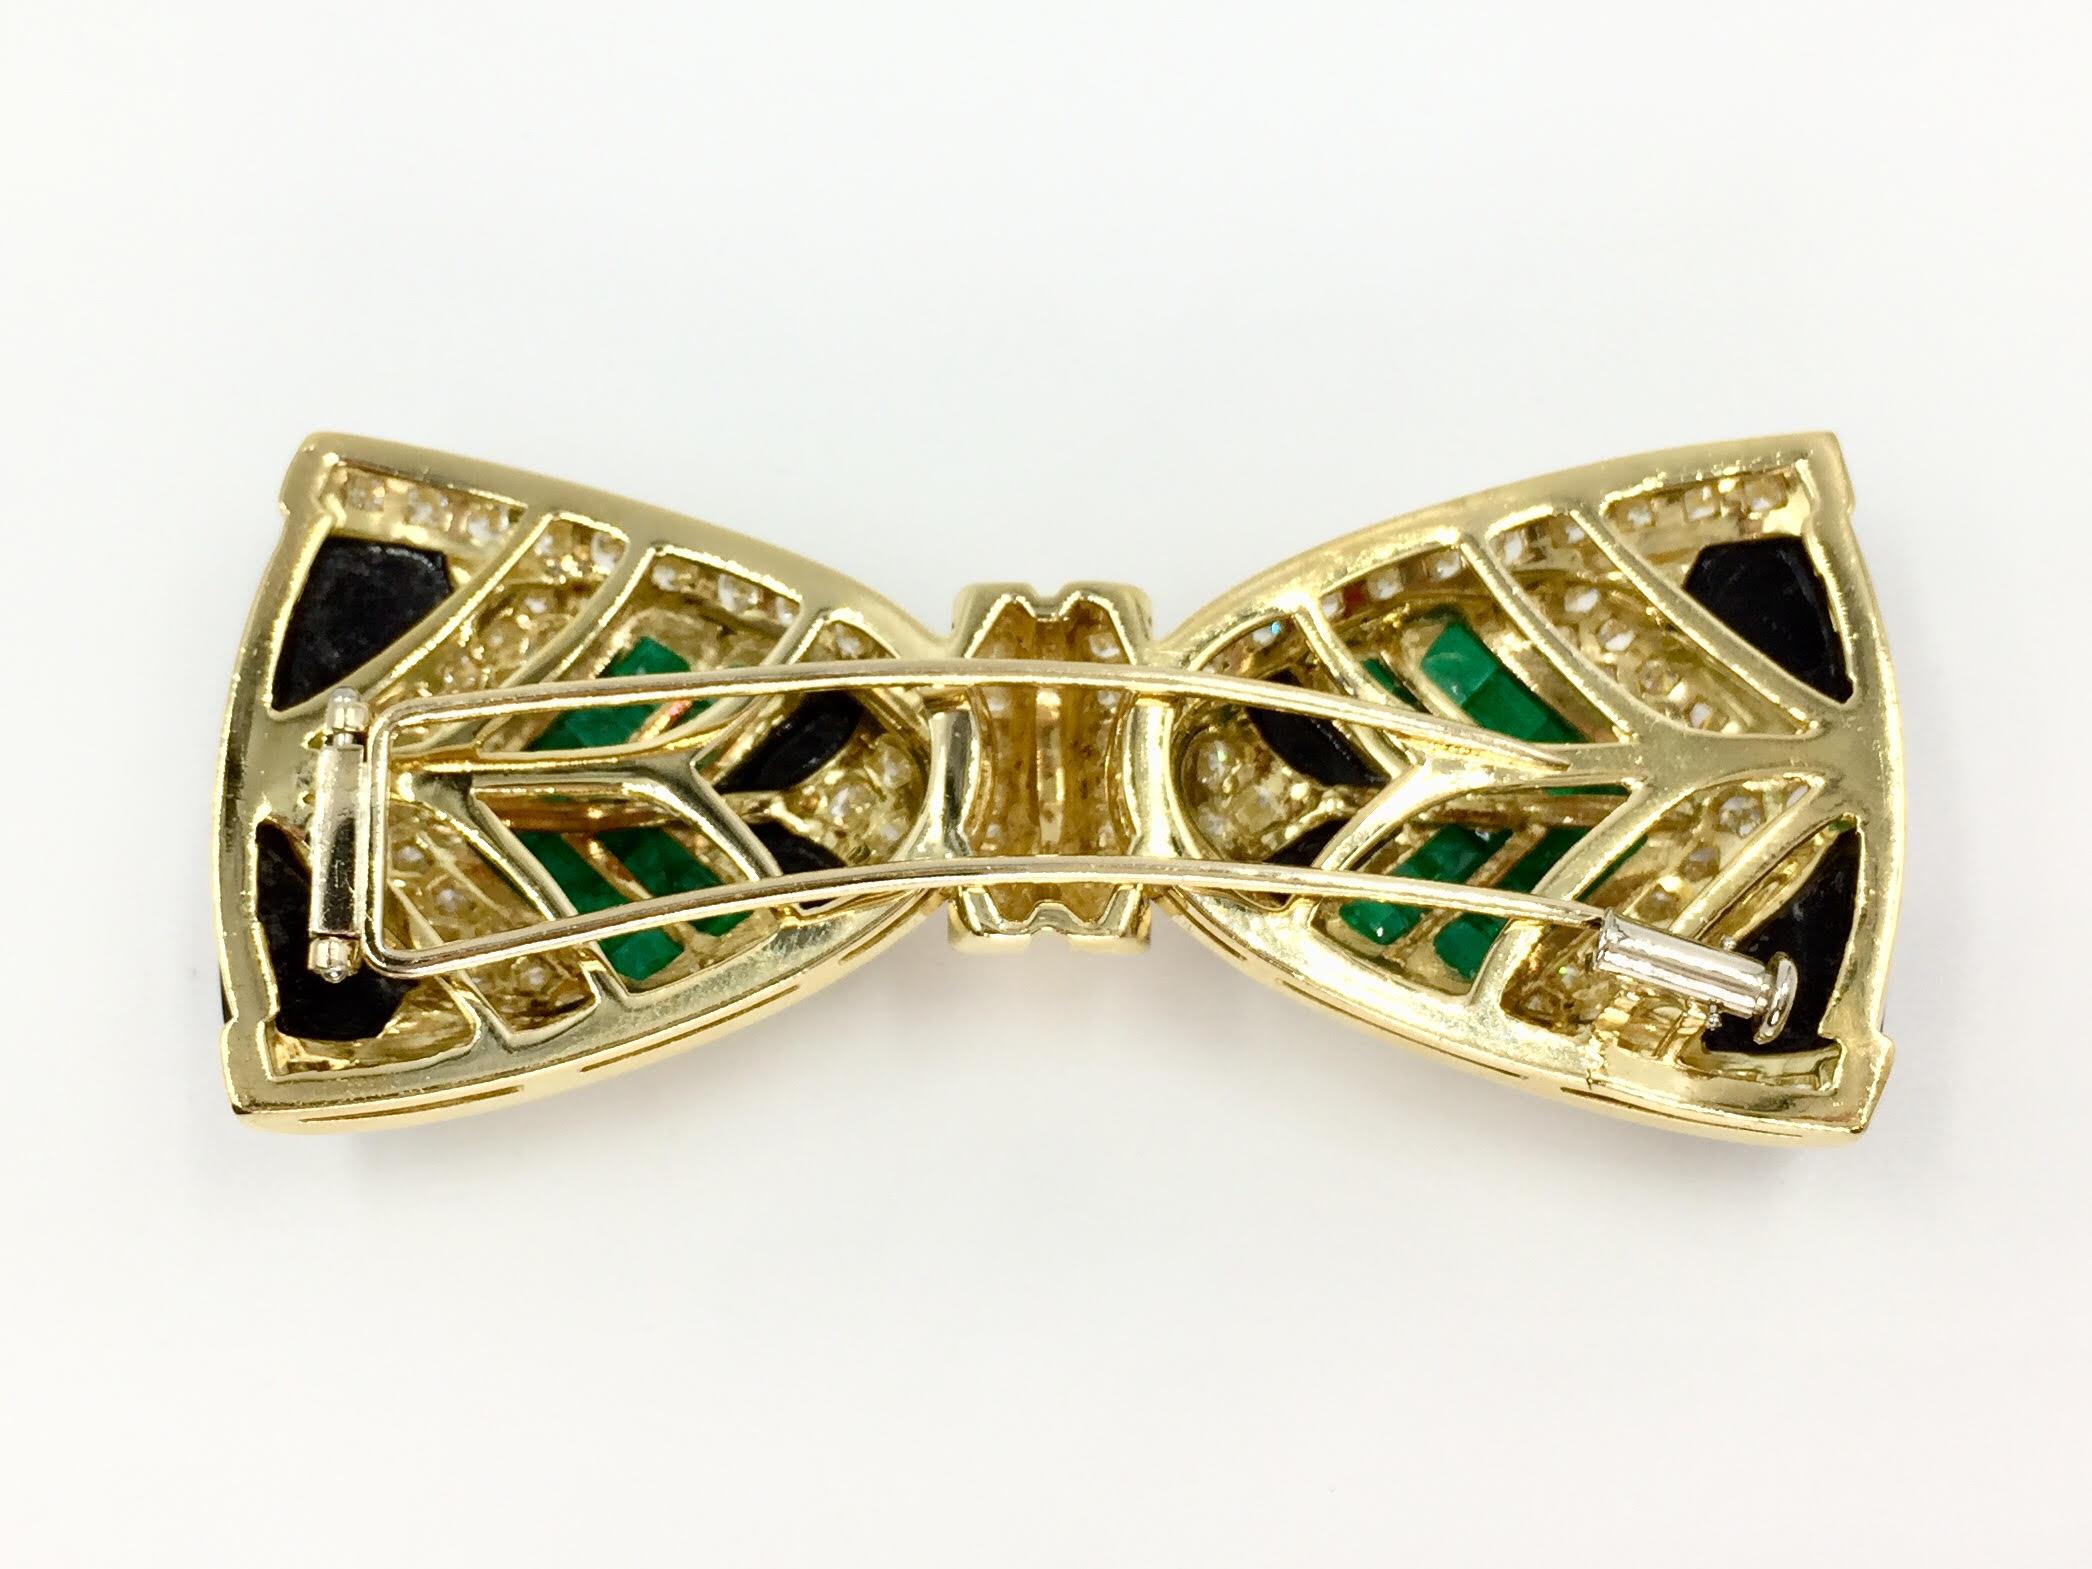 Diamond, Emerald and Onyx 18 Karat Large Bow Brooch by Giovane For Sale 2